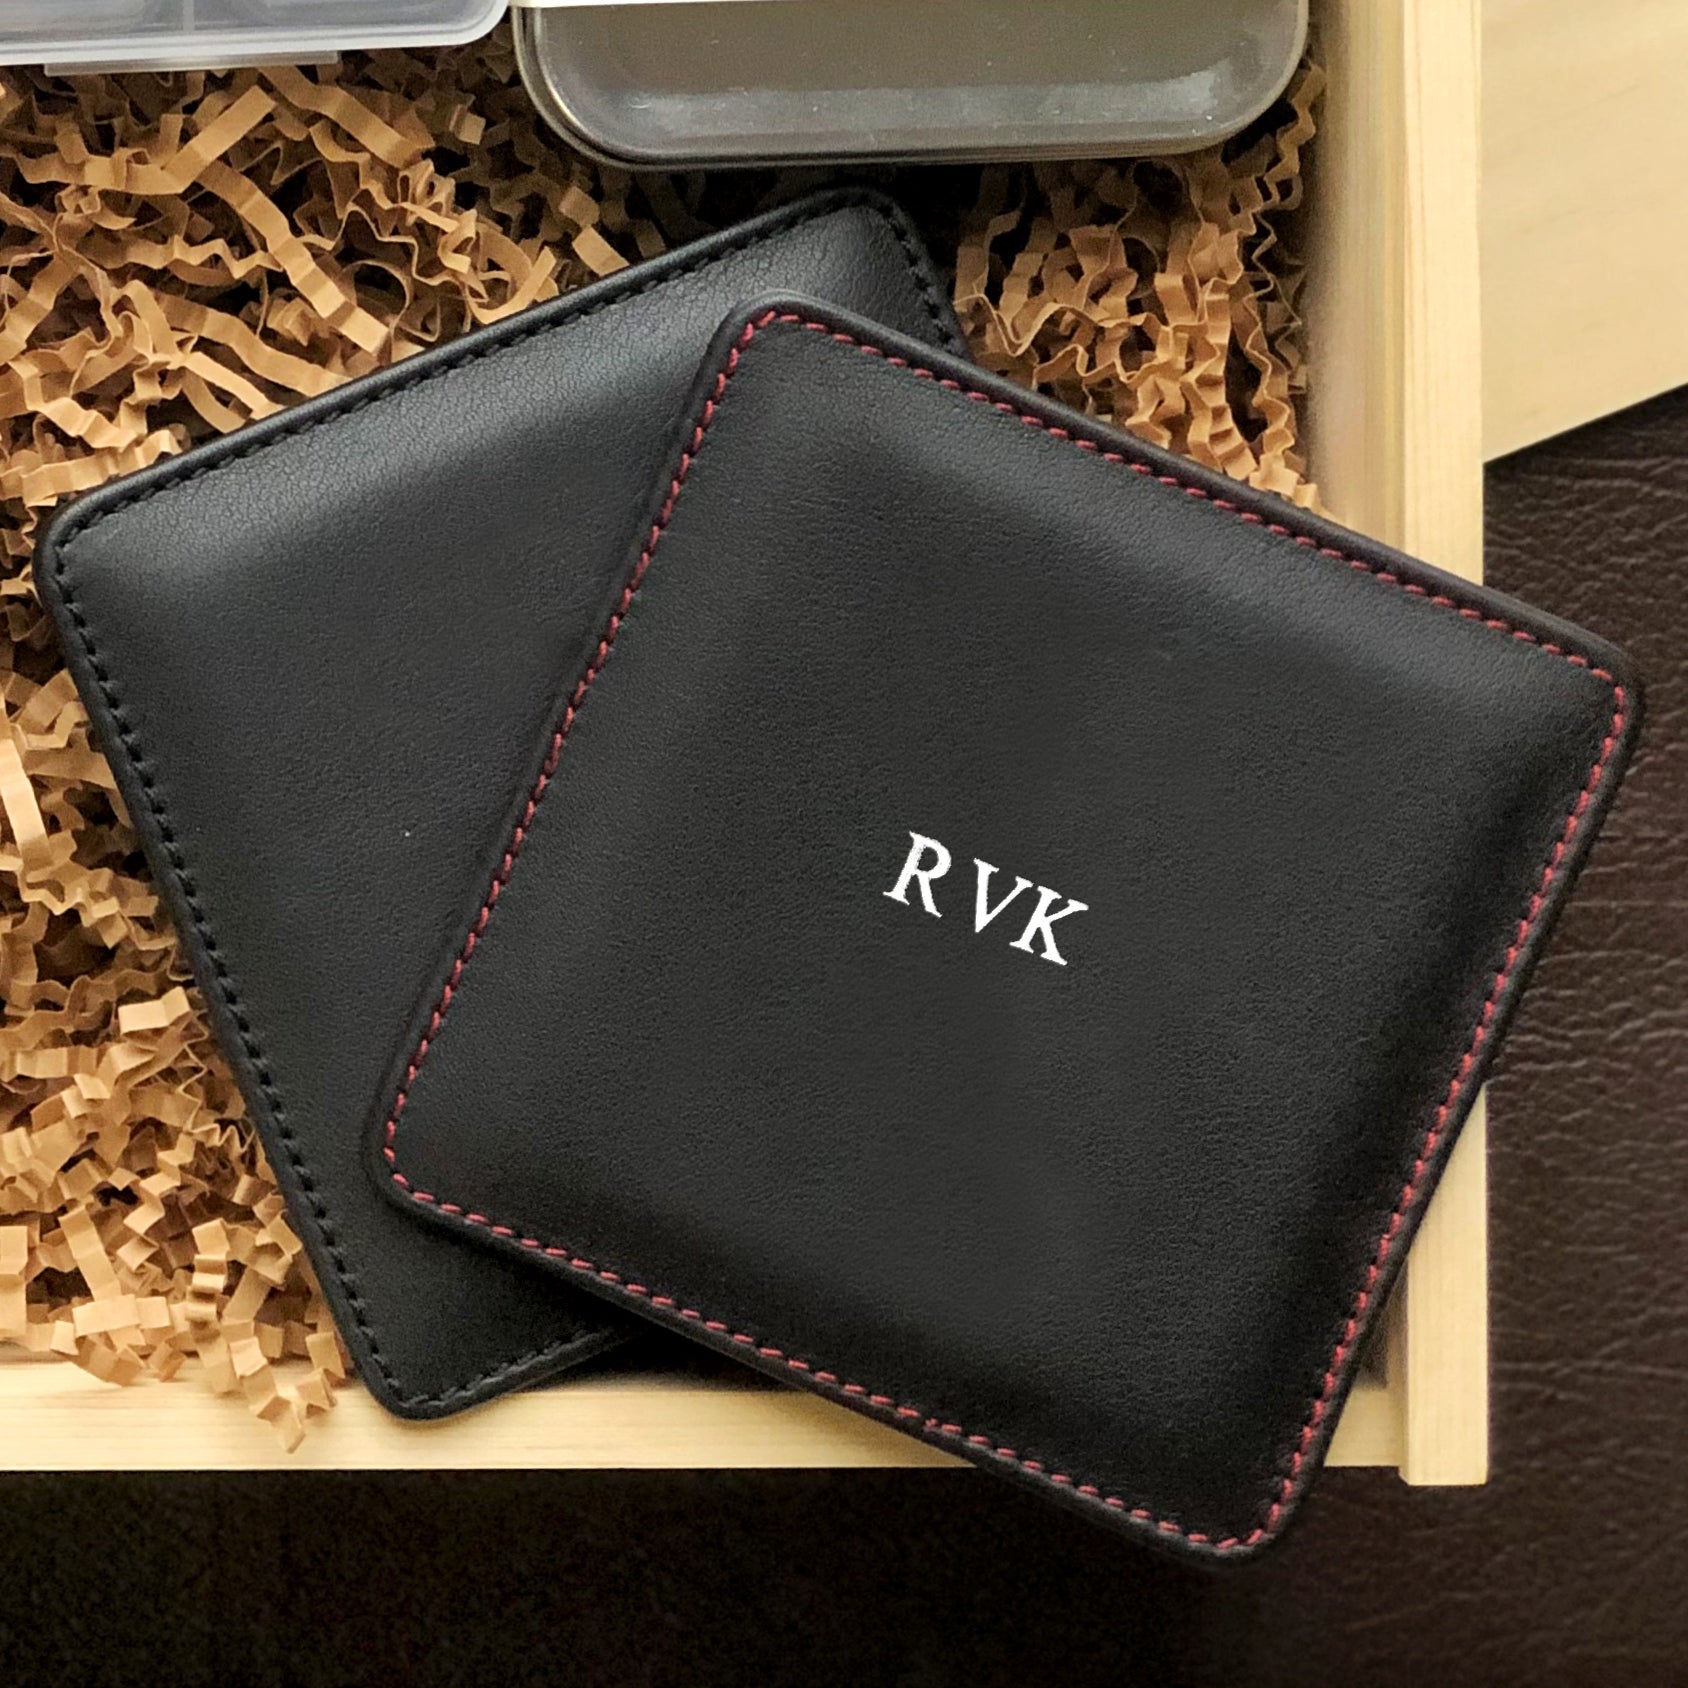 20 Professional Corporate Gifts Idea Under $100 | Leather Coasters